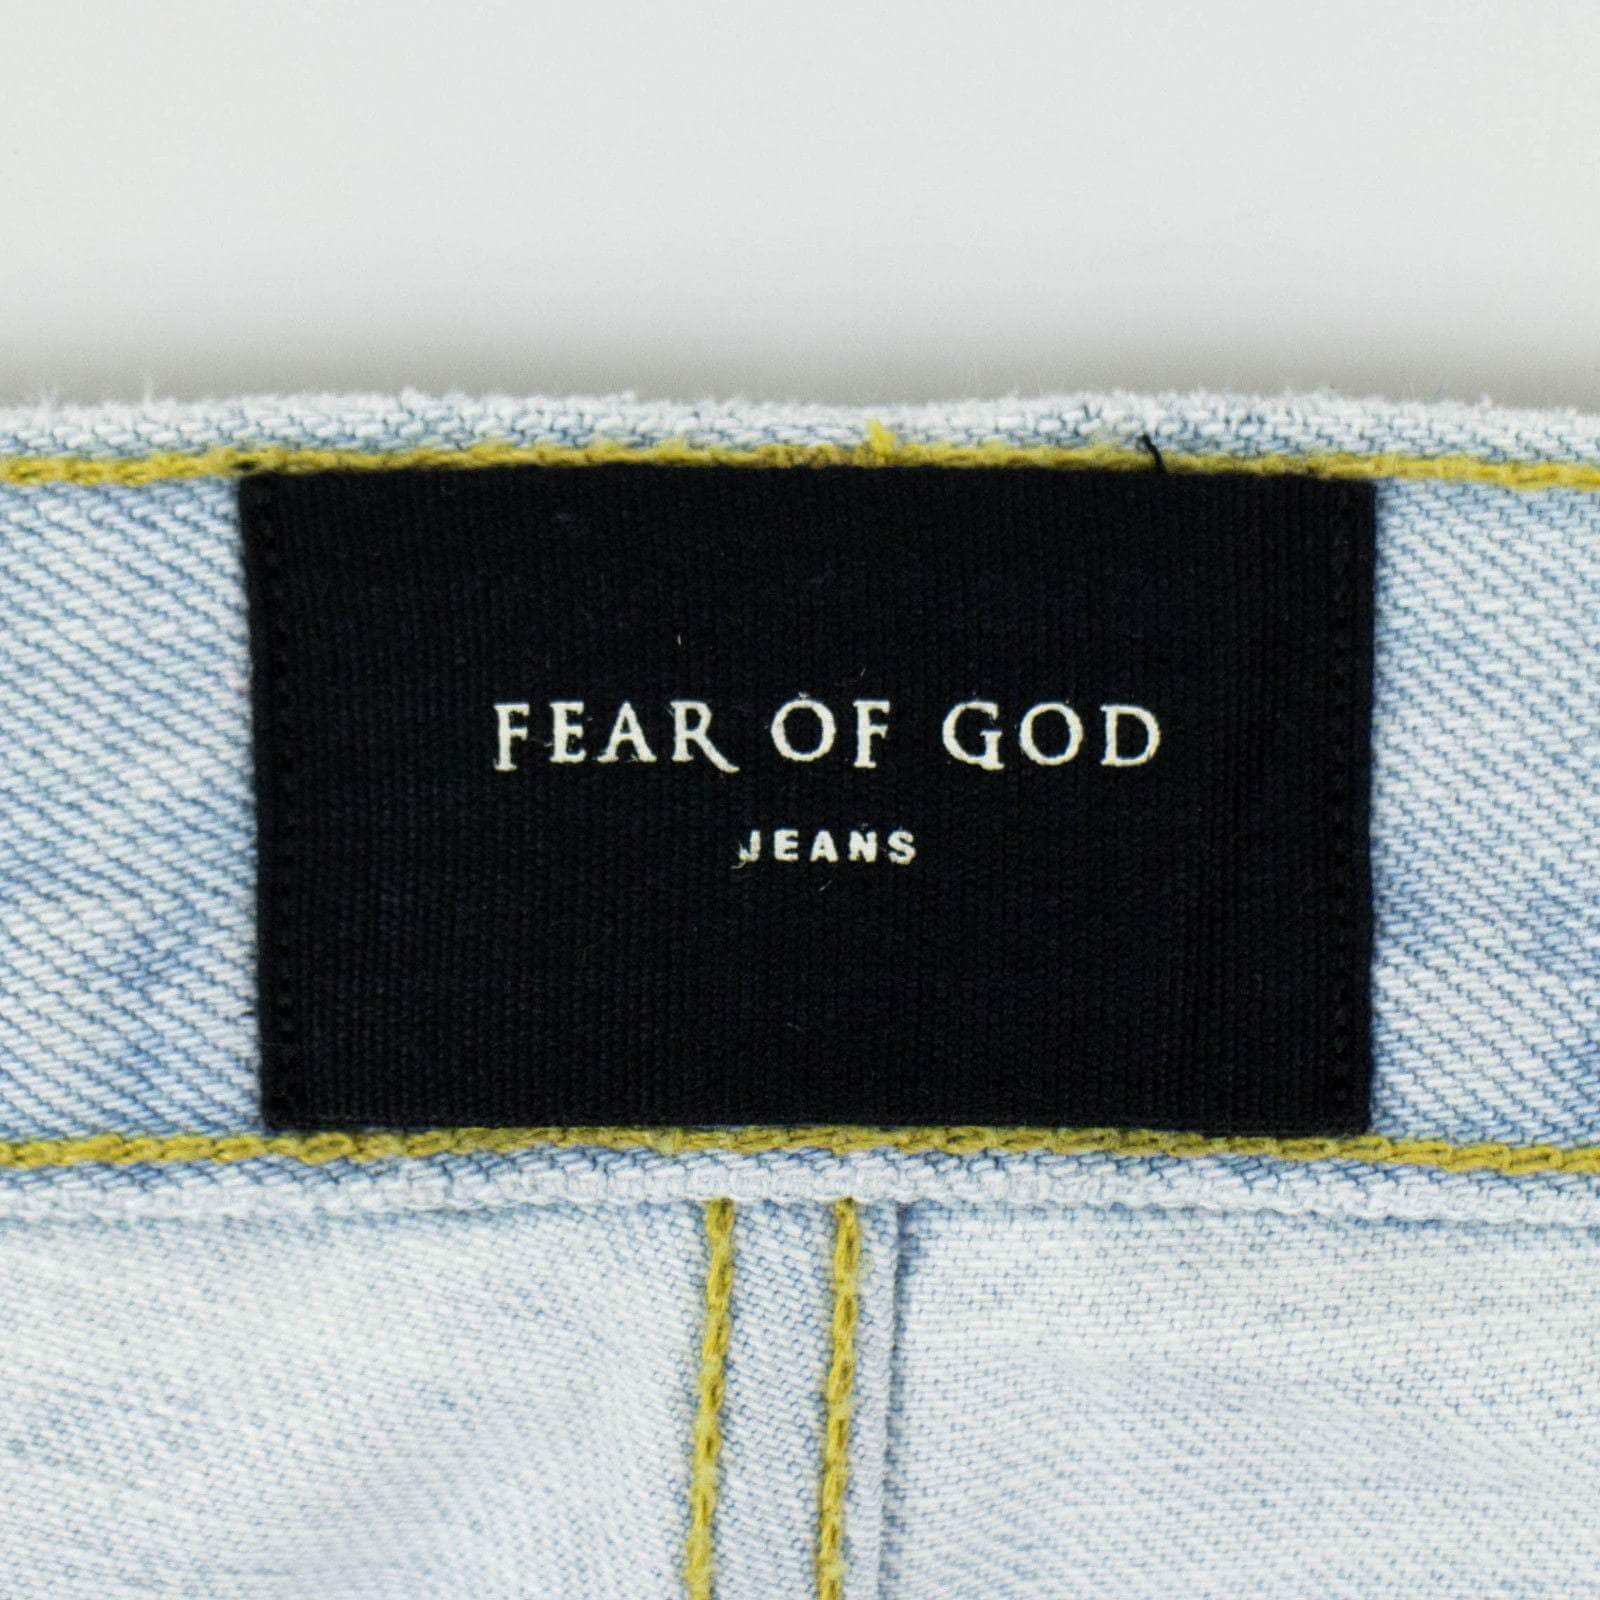 Fear Of God 250-500, channelenable-all, chicmi, couponcollection, fear-of-god, gender-mens, main-clothing, mens-shoes, mens-slim-fit-jeans, shop375, Stadium Goods 30 Fifth Collection' Cotton Denim Slim-Fit Jeans 54LE-1152/30 54LE-1152/30